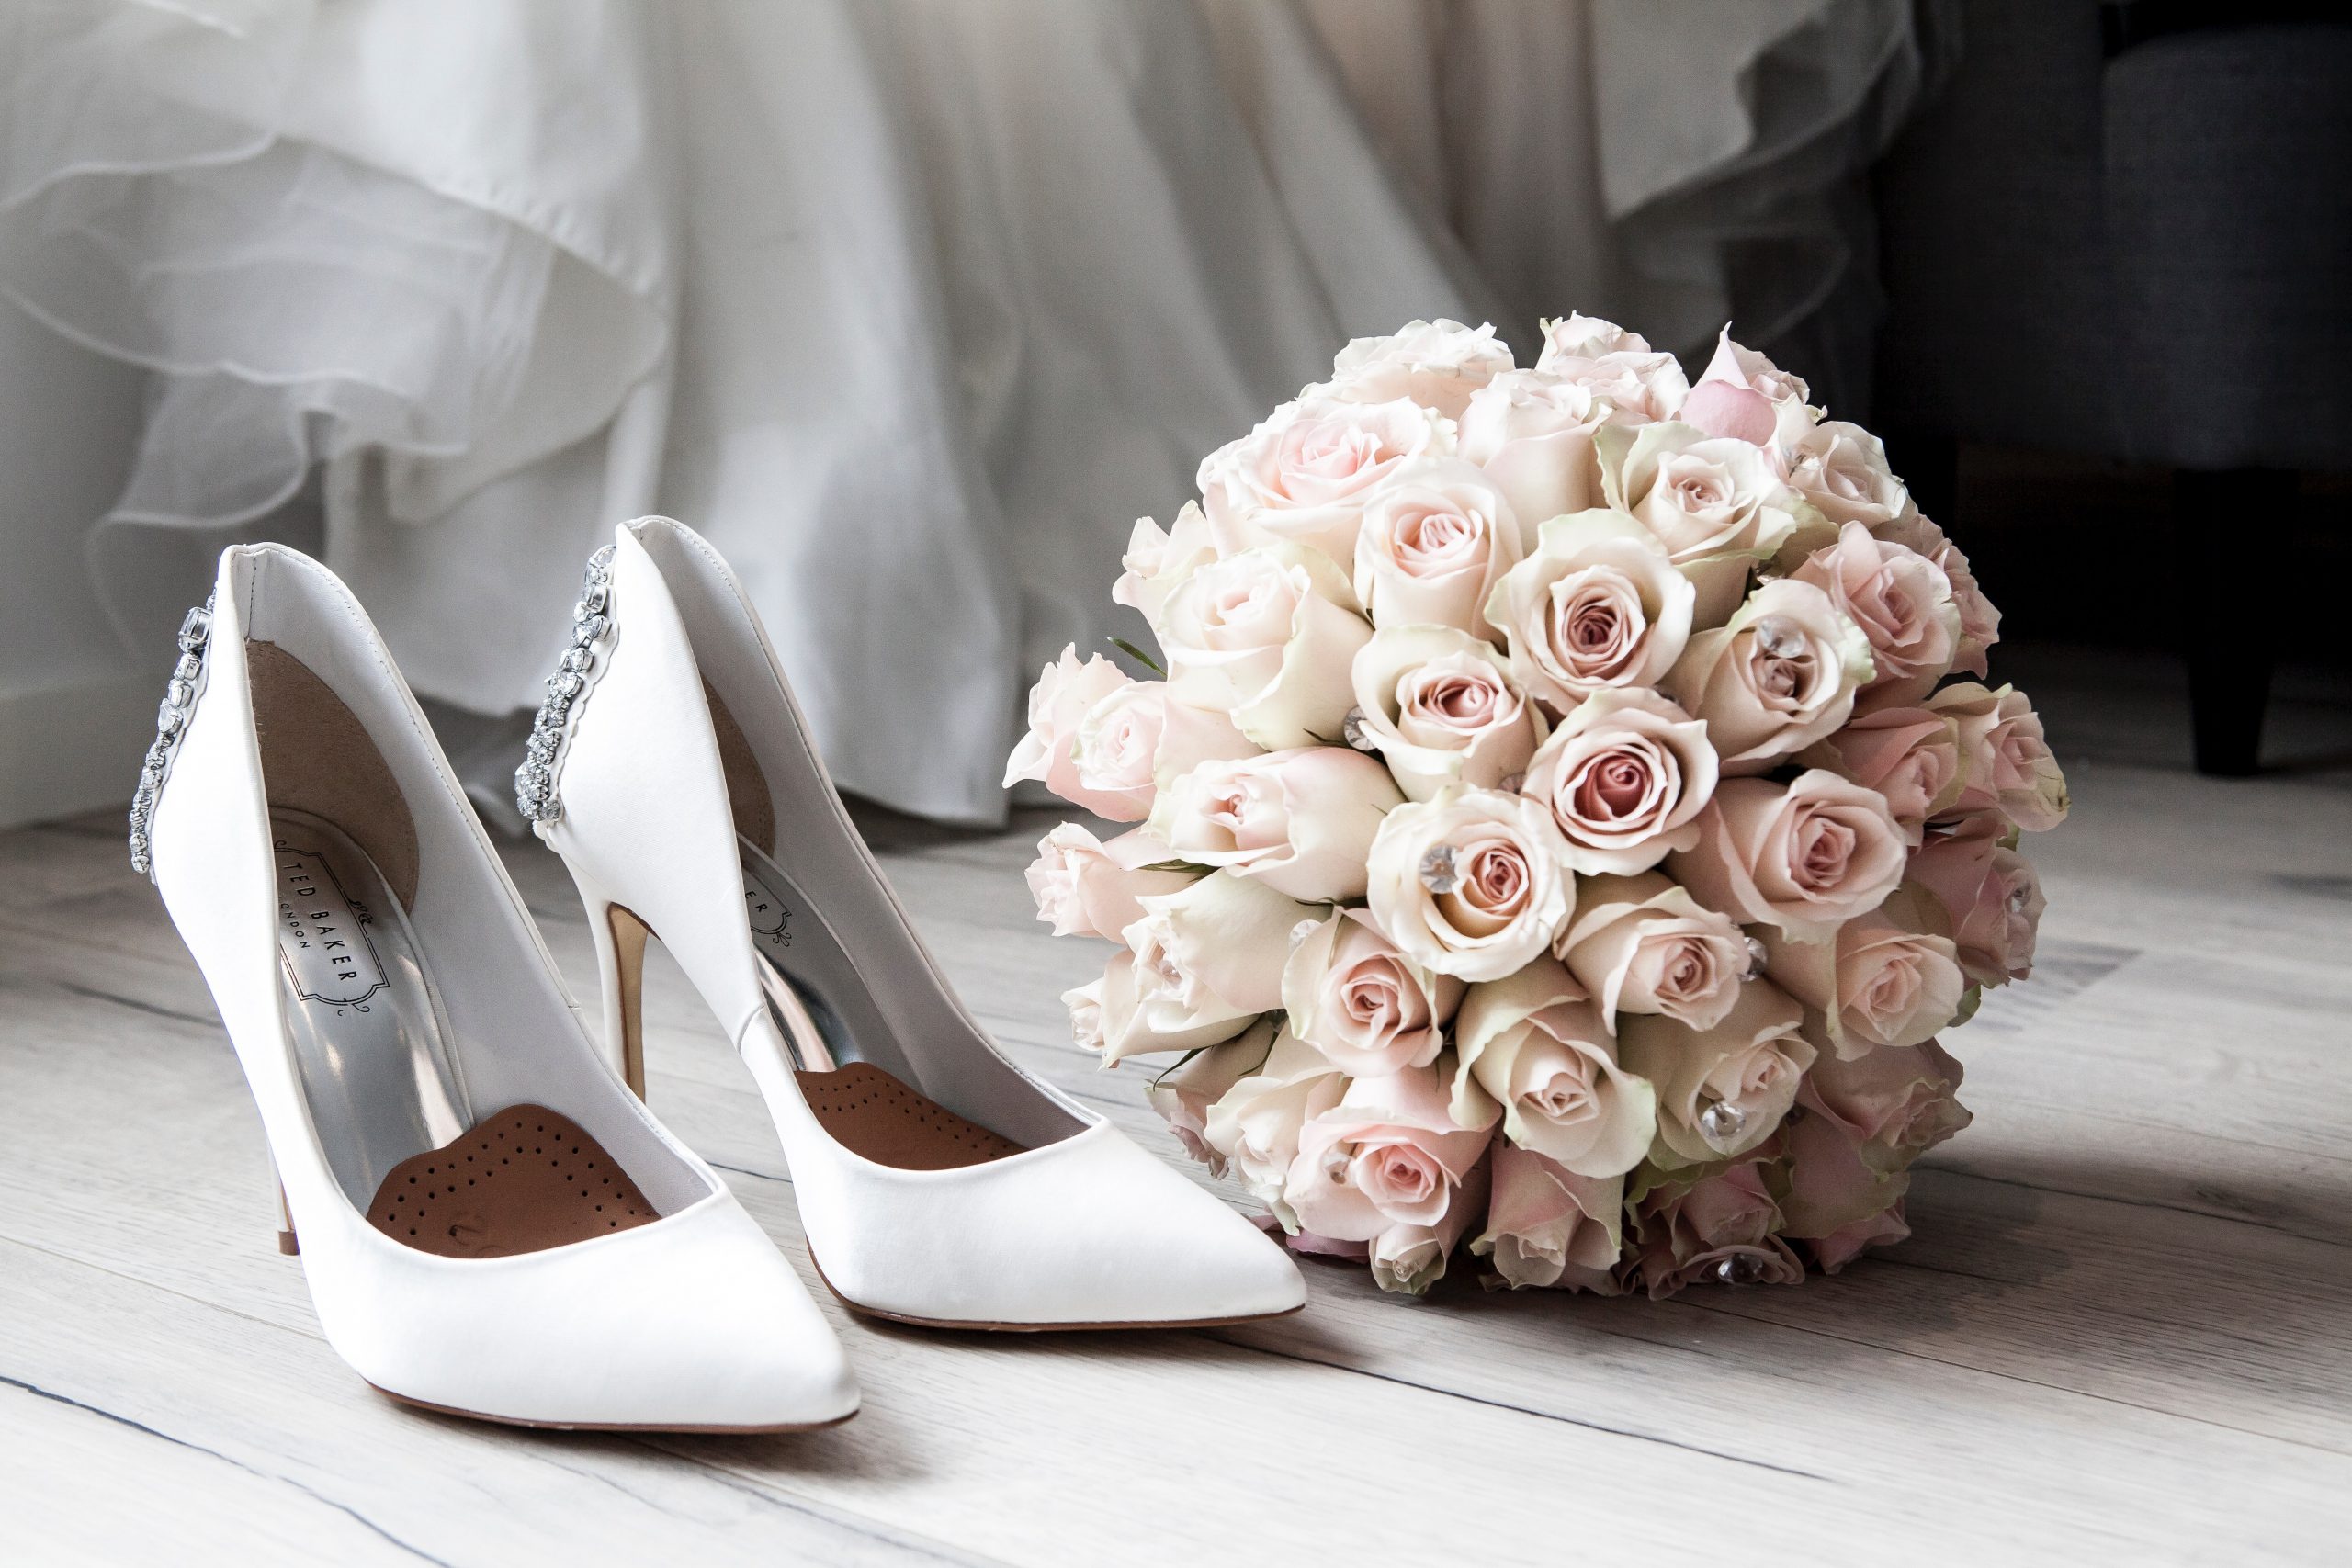 Shoes and flower bouquet on floor.